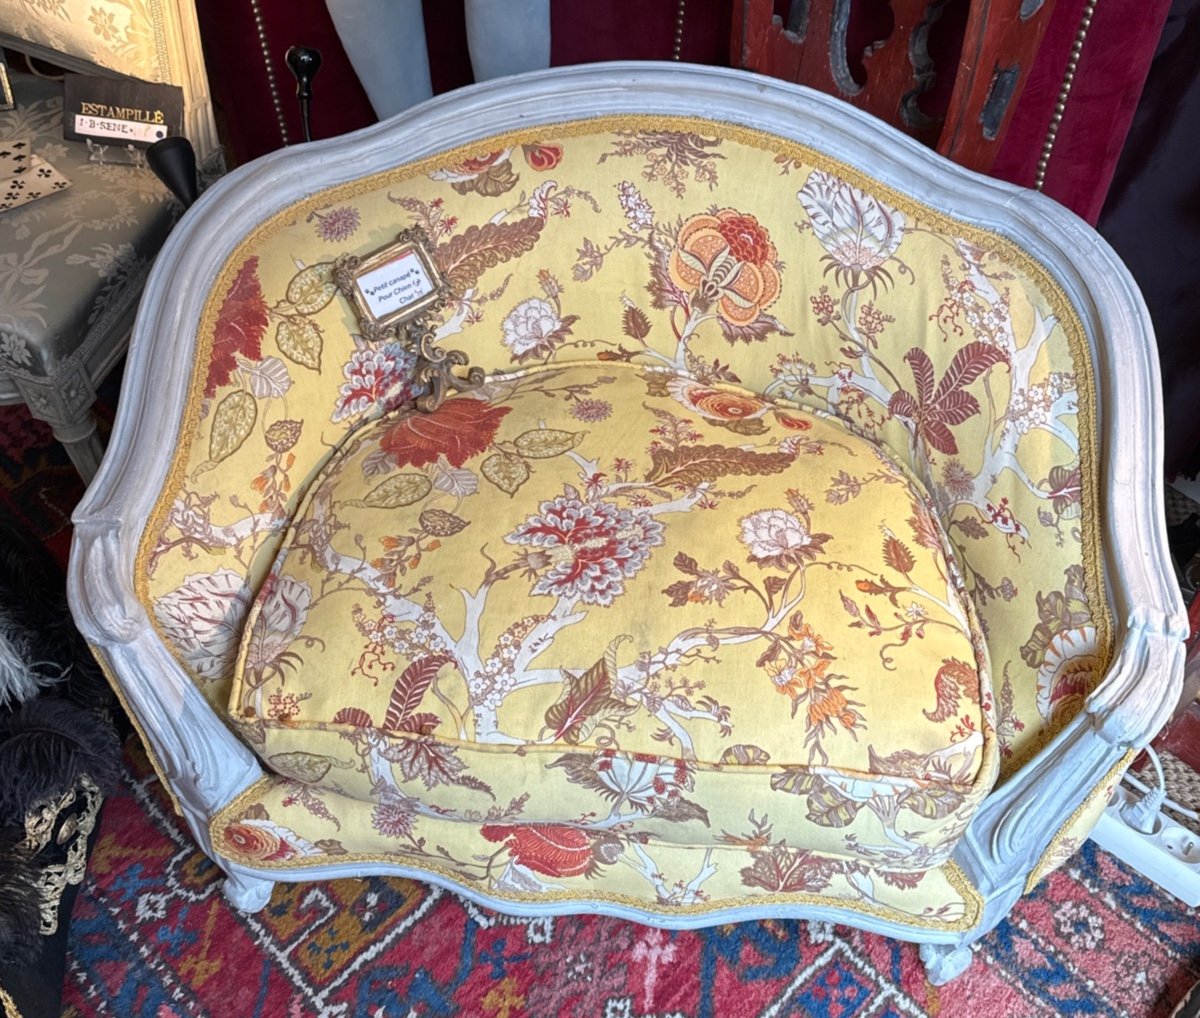  Small Marquise Dog, Cats Sofa , Very Comfortable, 20th Century, Louis XV Style.-photo-3